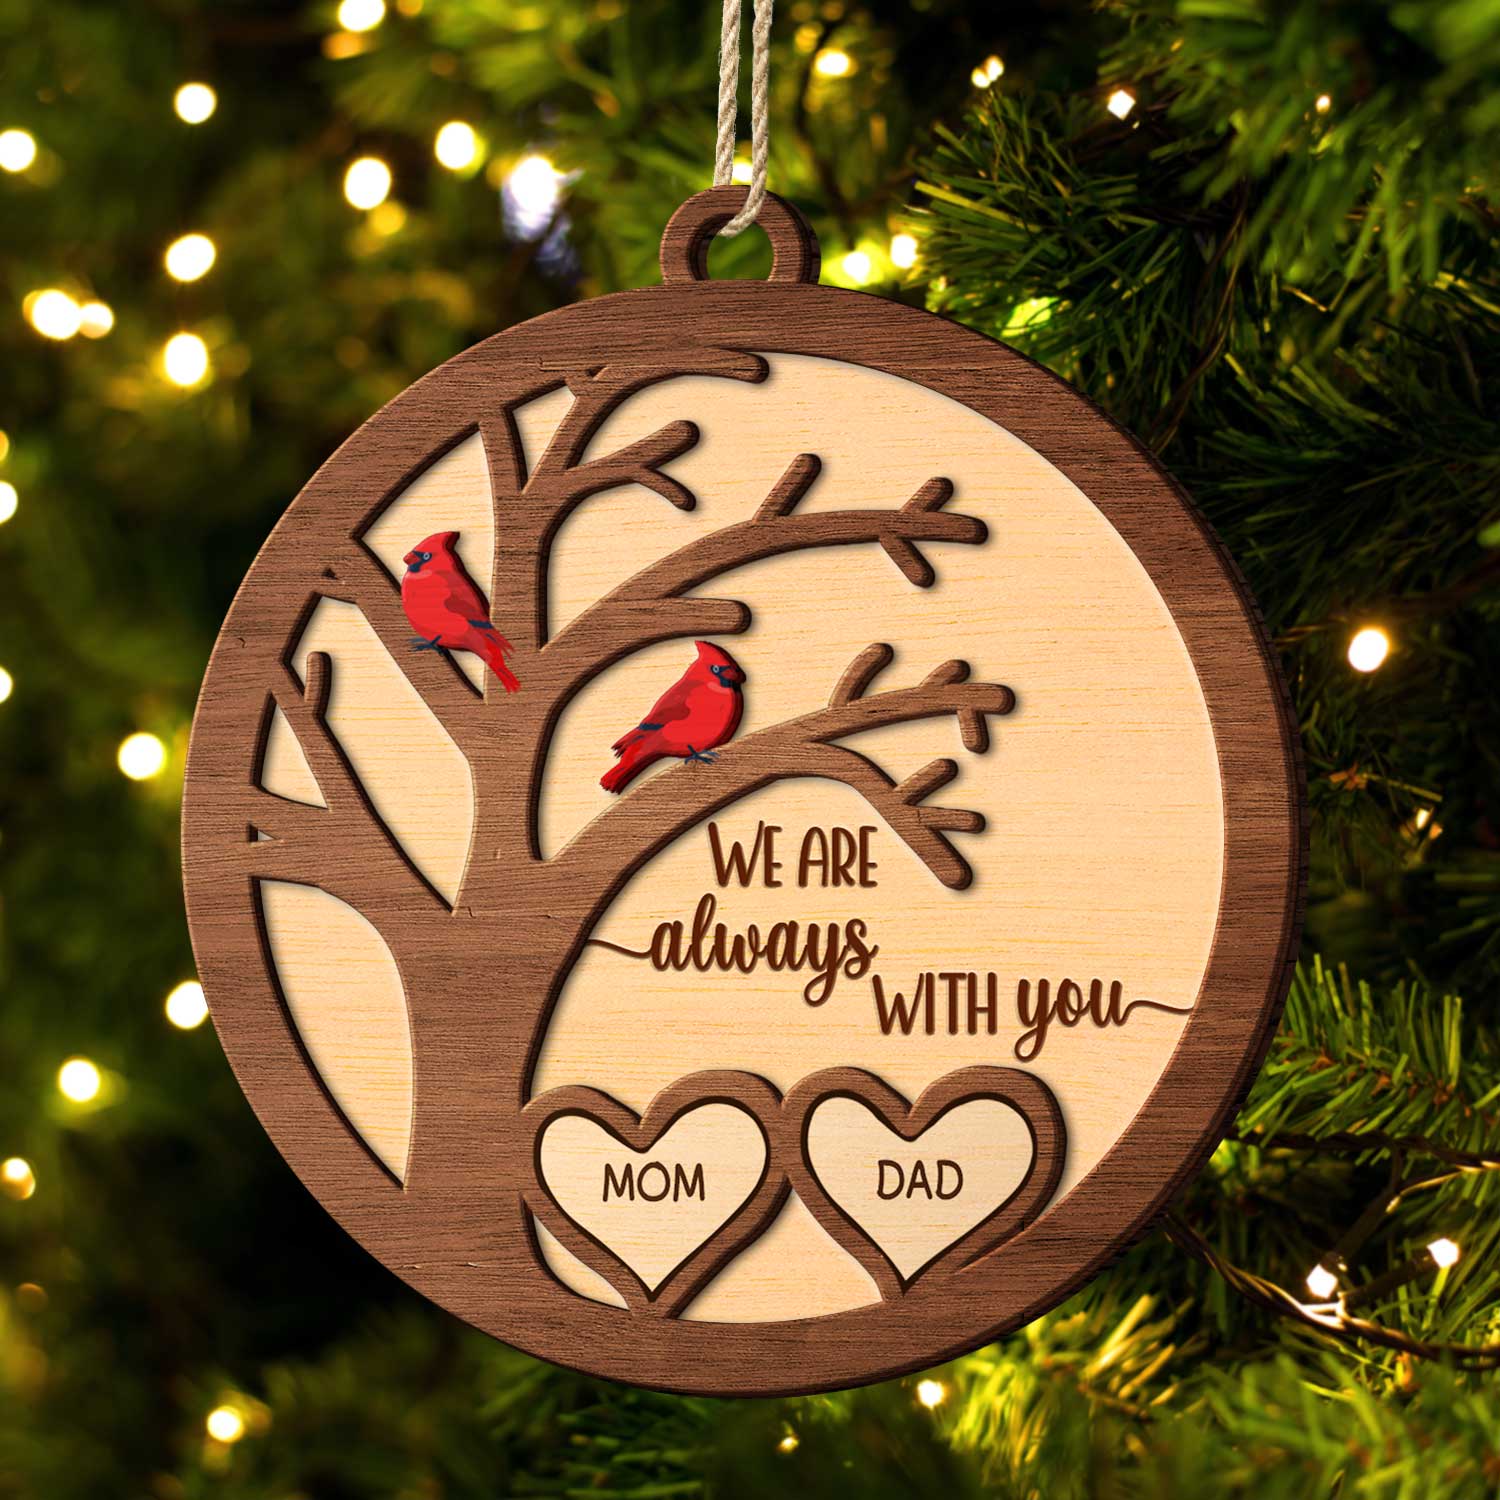 We Are Always With You Cardinal Bird - Sympathy Gift, Christmas Keepsake, Family Memorial Gift - Personalized 2-Layered Wooden Ornament